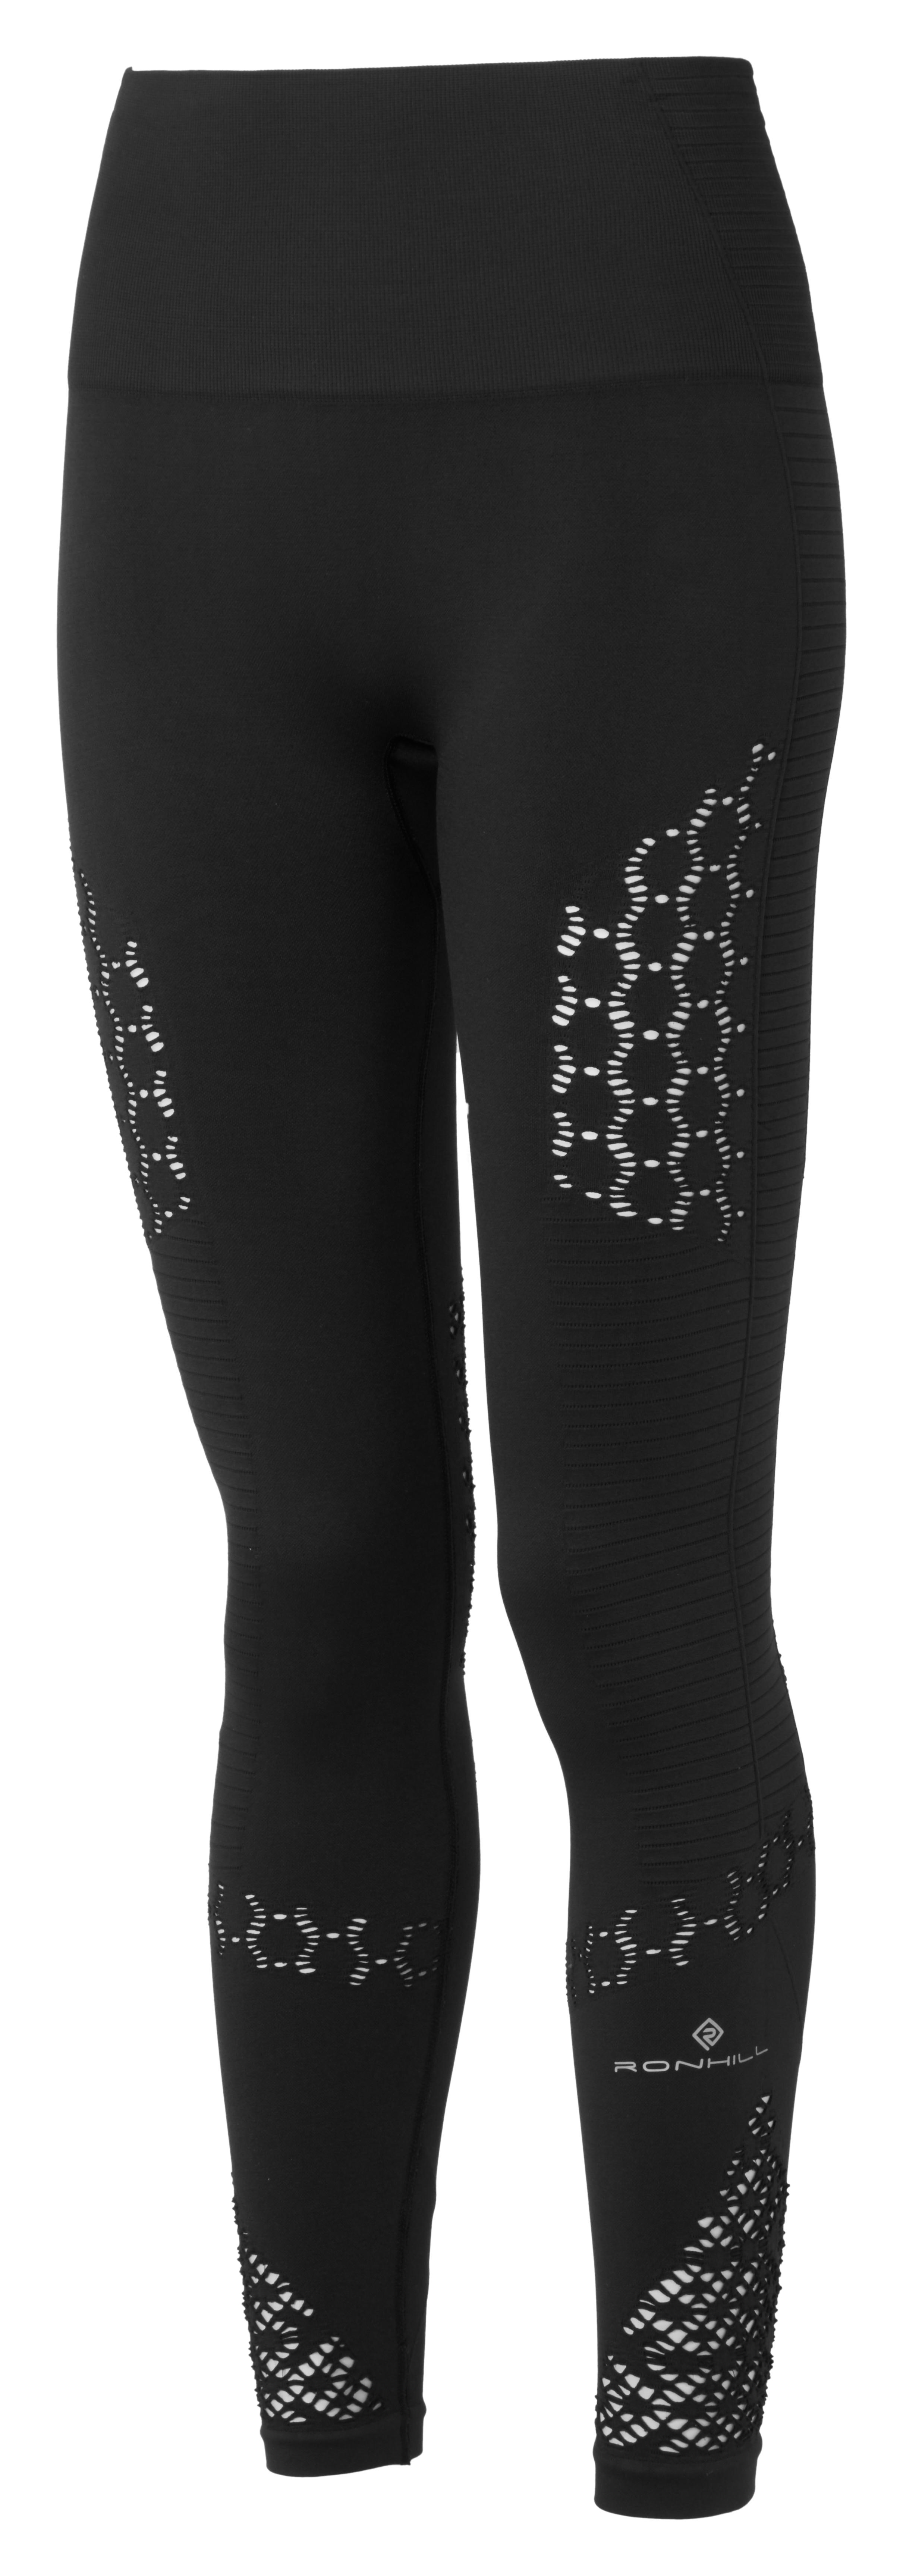 Image of Collant de running Femme Ronhill Life (sans couture) - All Black